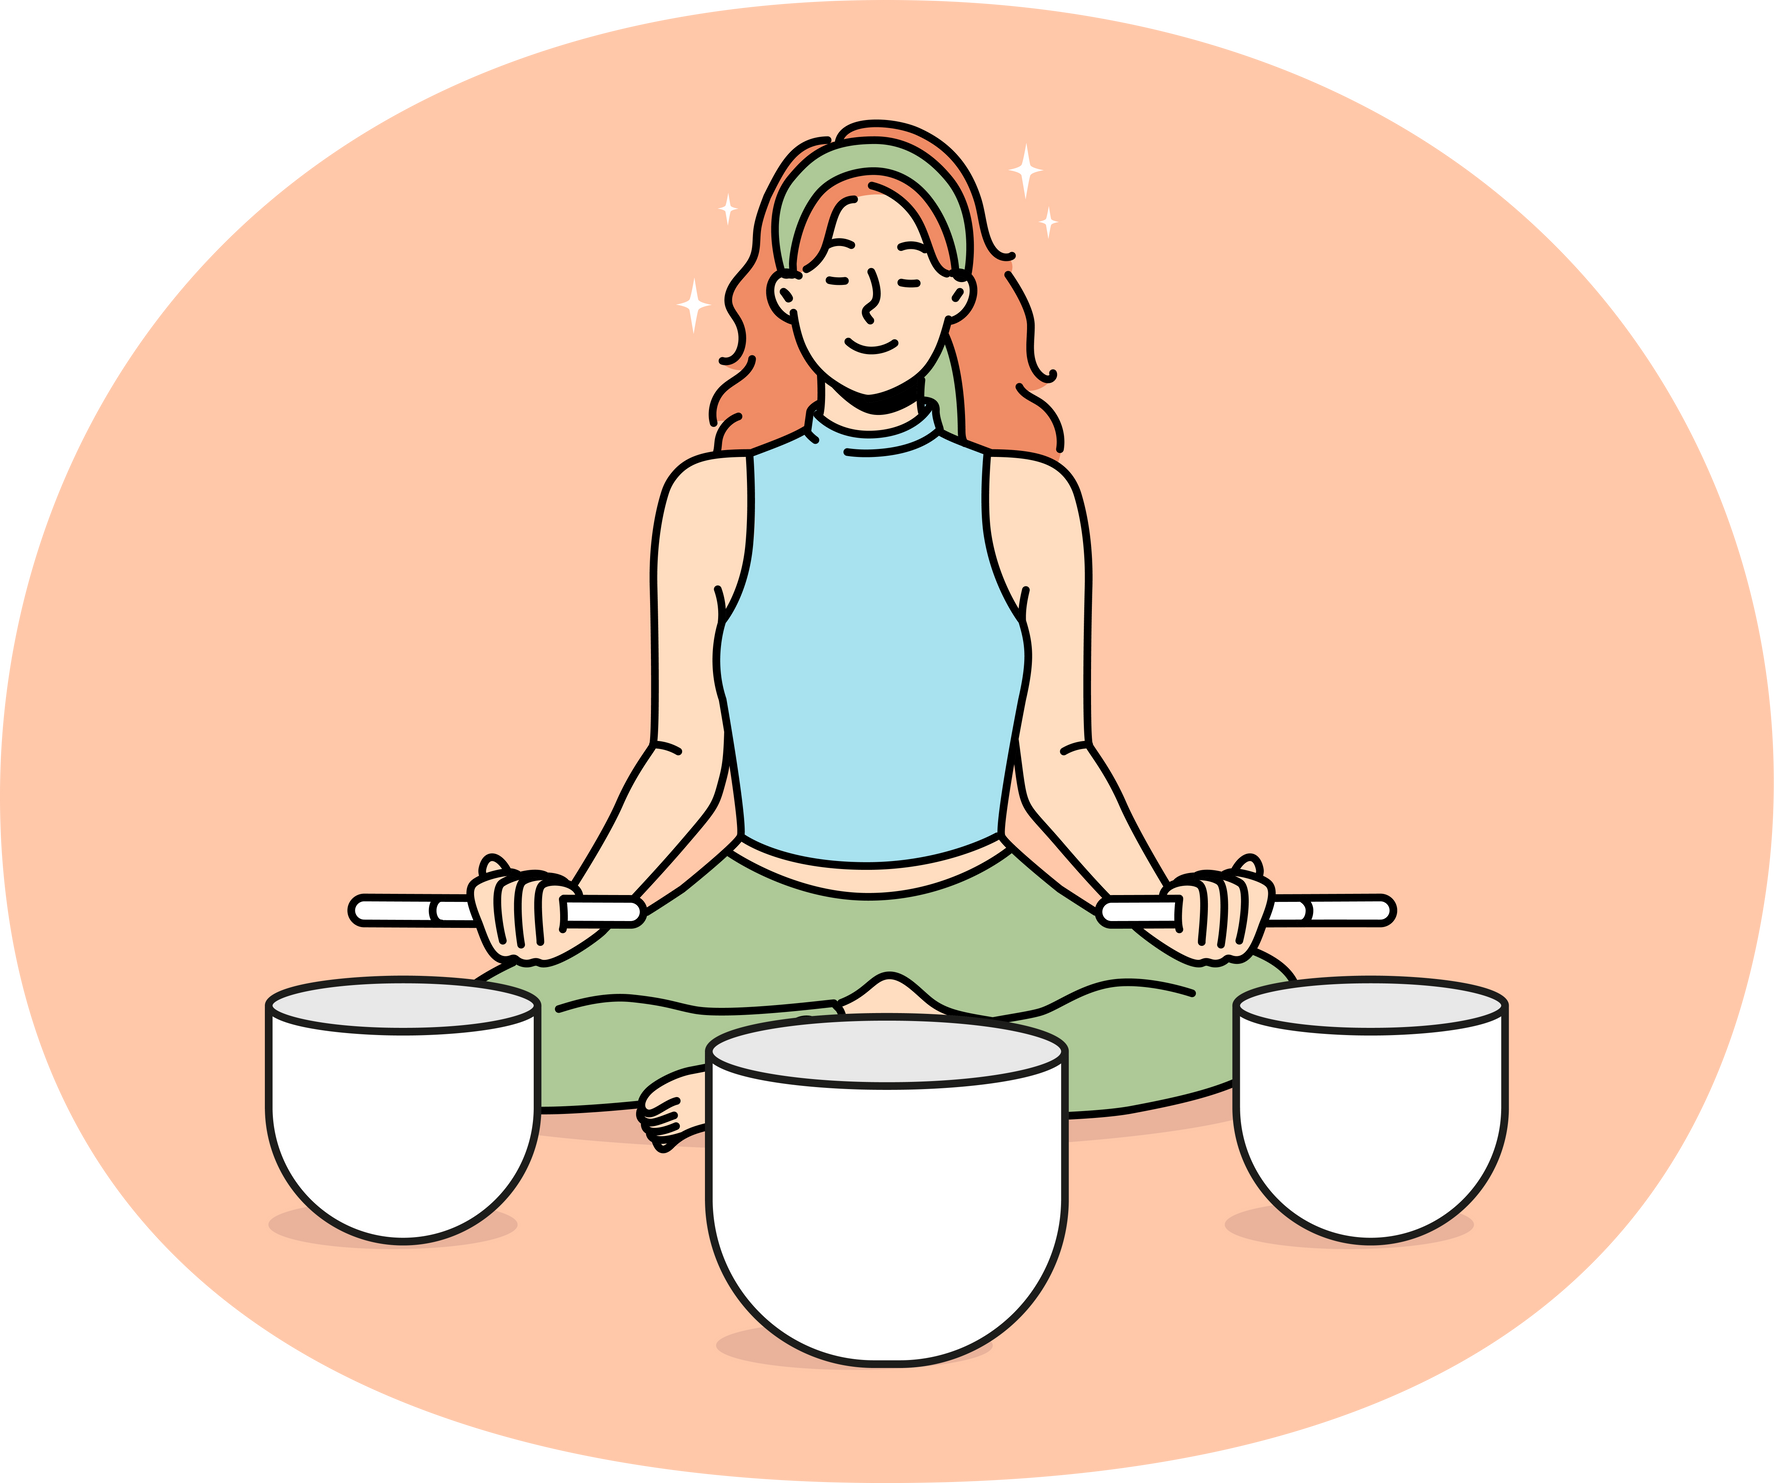 Calm Woman Sit in Lotus Pose Meditate with Singing Bowls. Relaxed Female Engaged in Meditation with Himalayan Bowls. Stress Relief Concept.